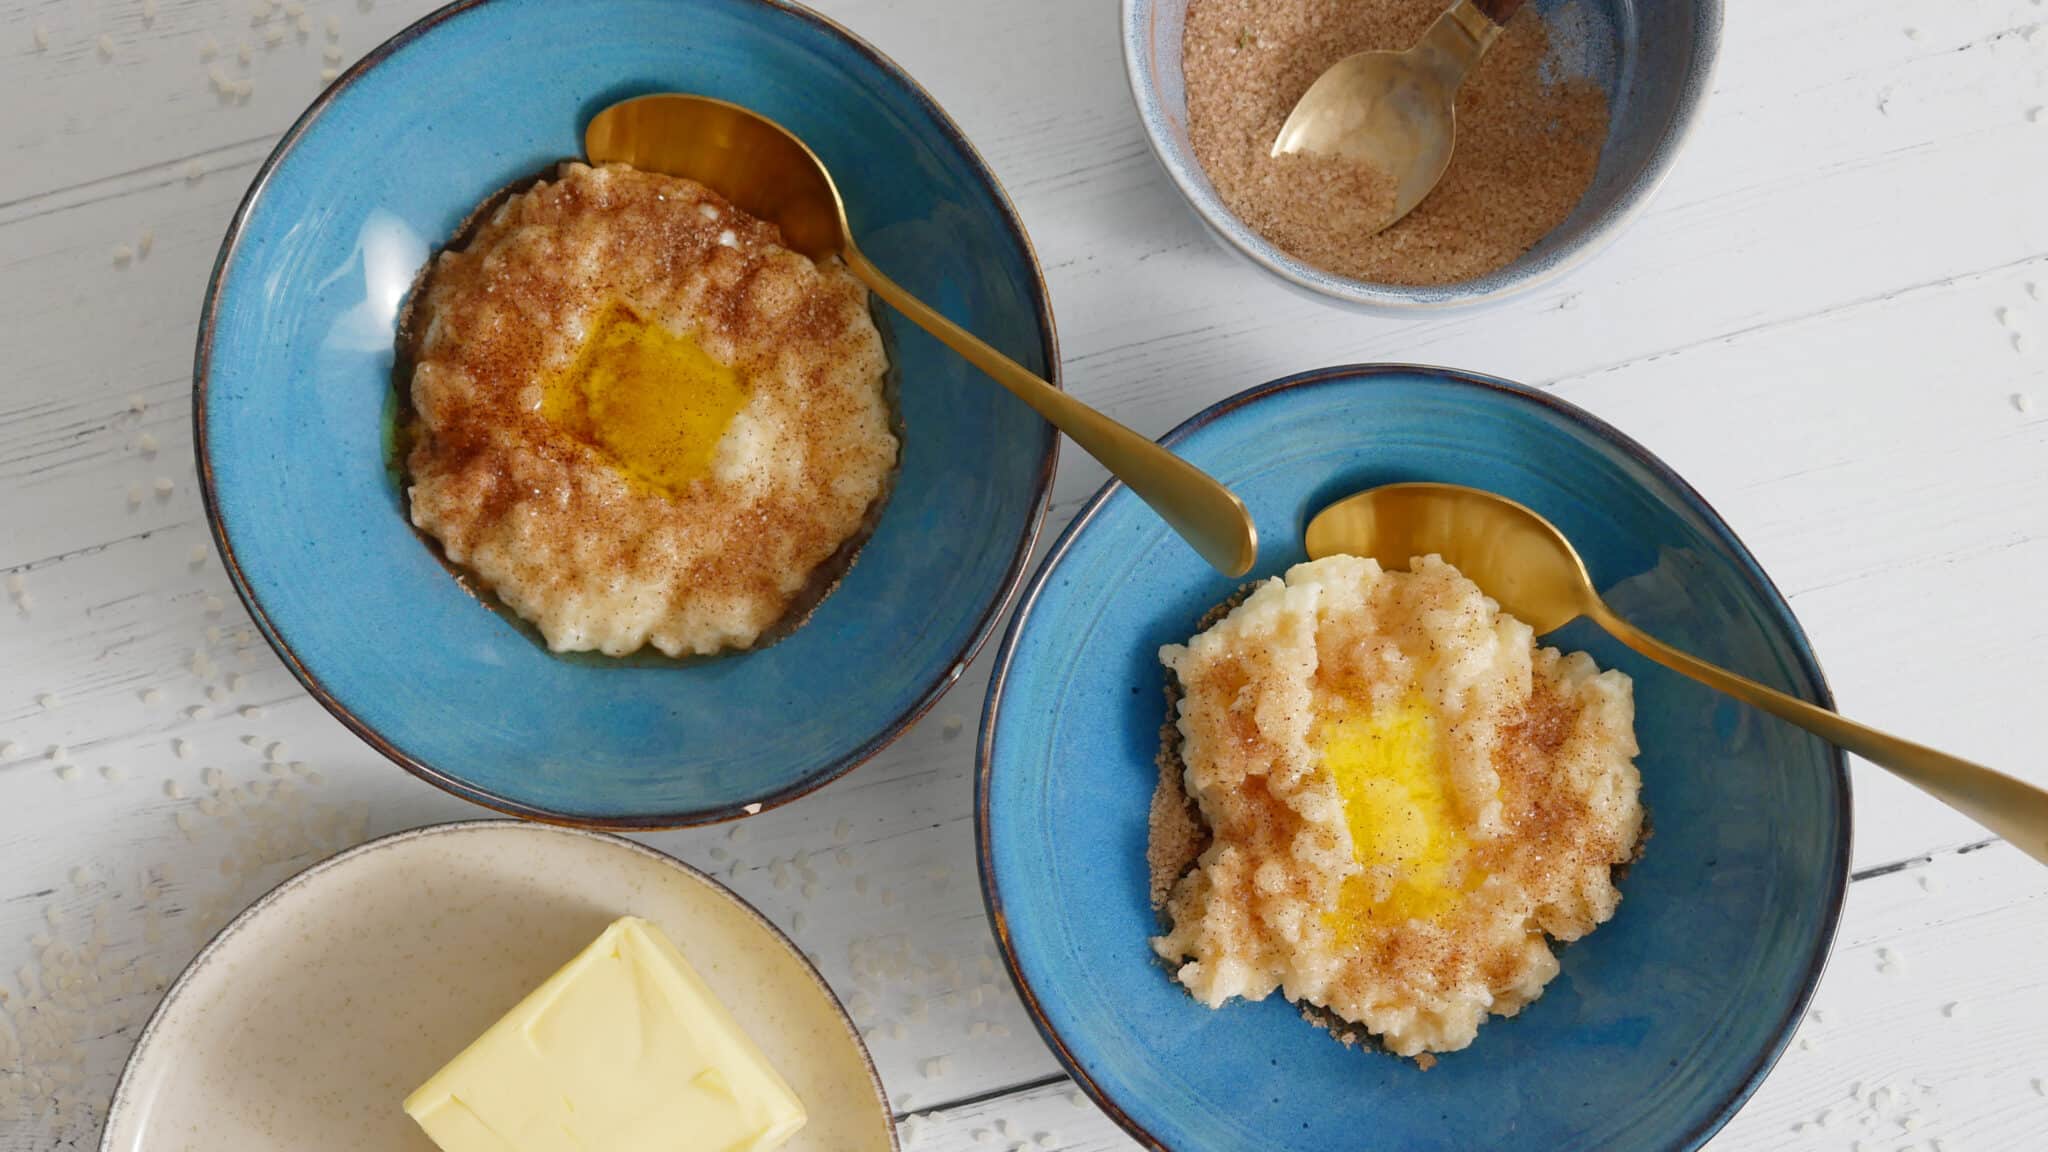 Two bowls of rice pudding, topped with cinnamon sugar and a dollop of butter.